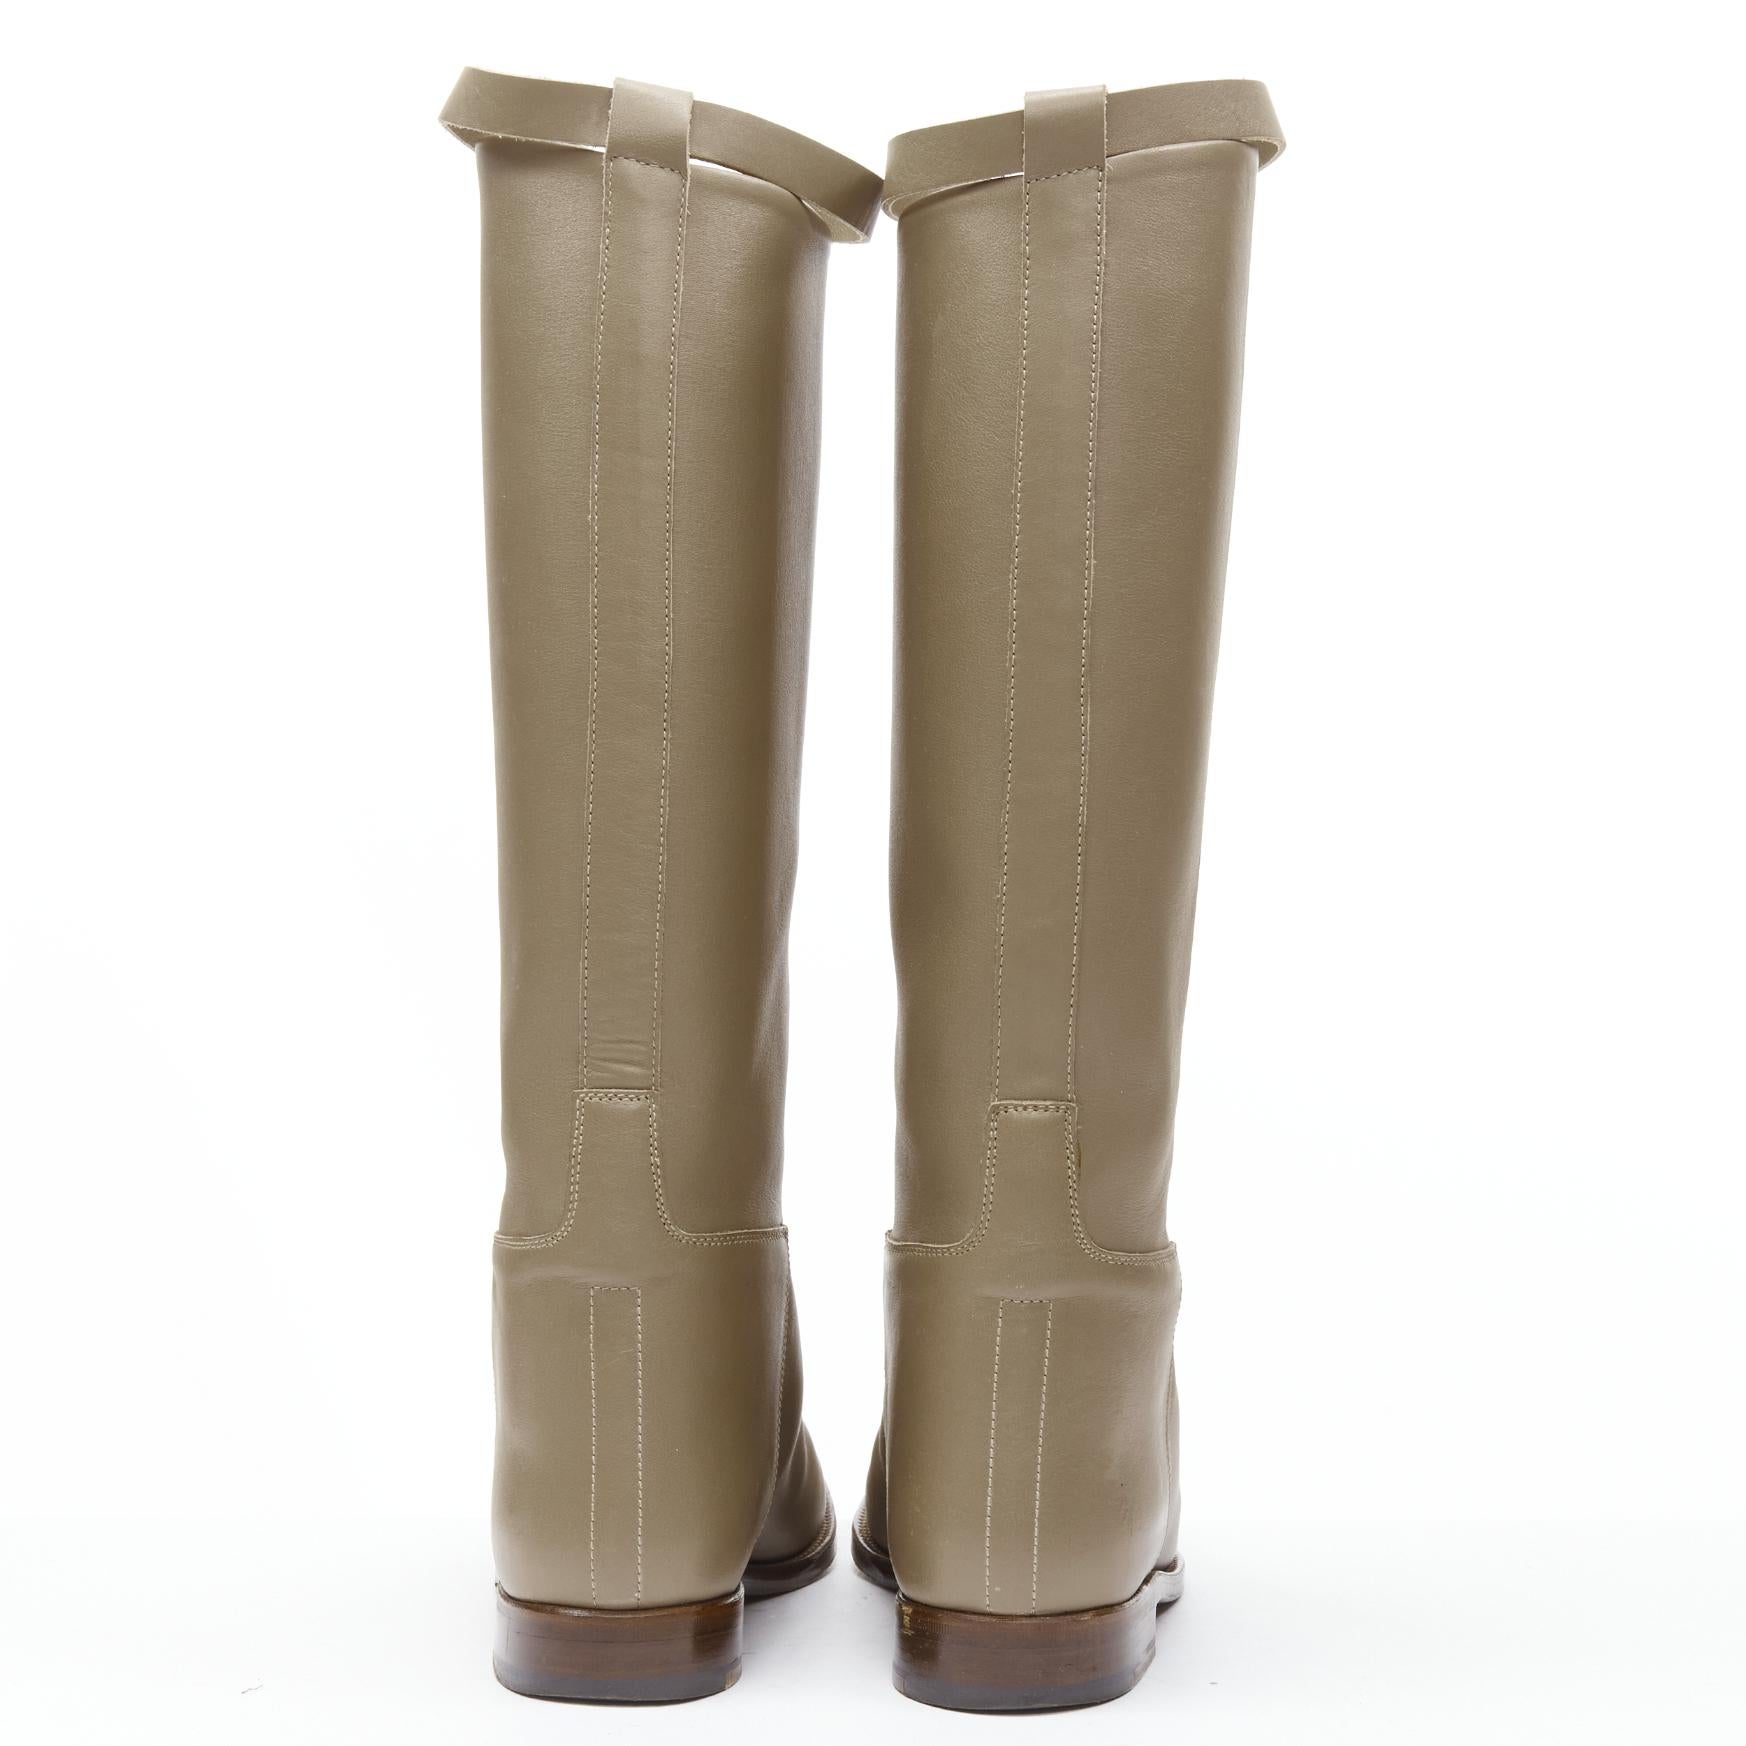 HERMES Kelly Jumping taupe brown PHW buckle riding boot EU37.5 For Sale 1